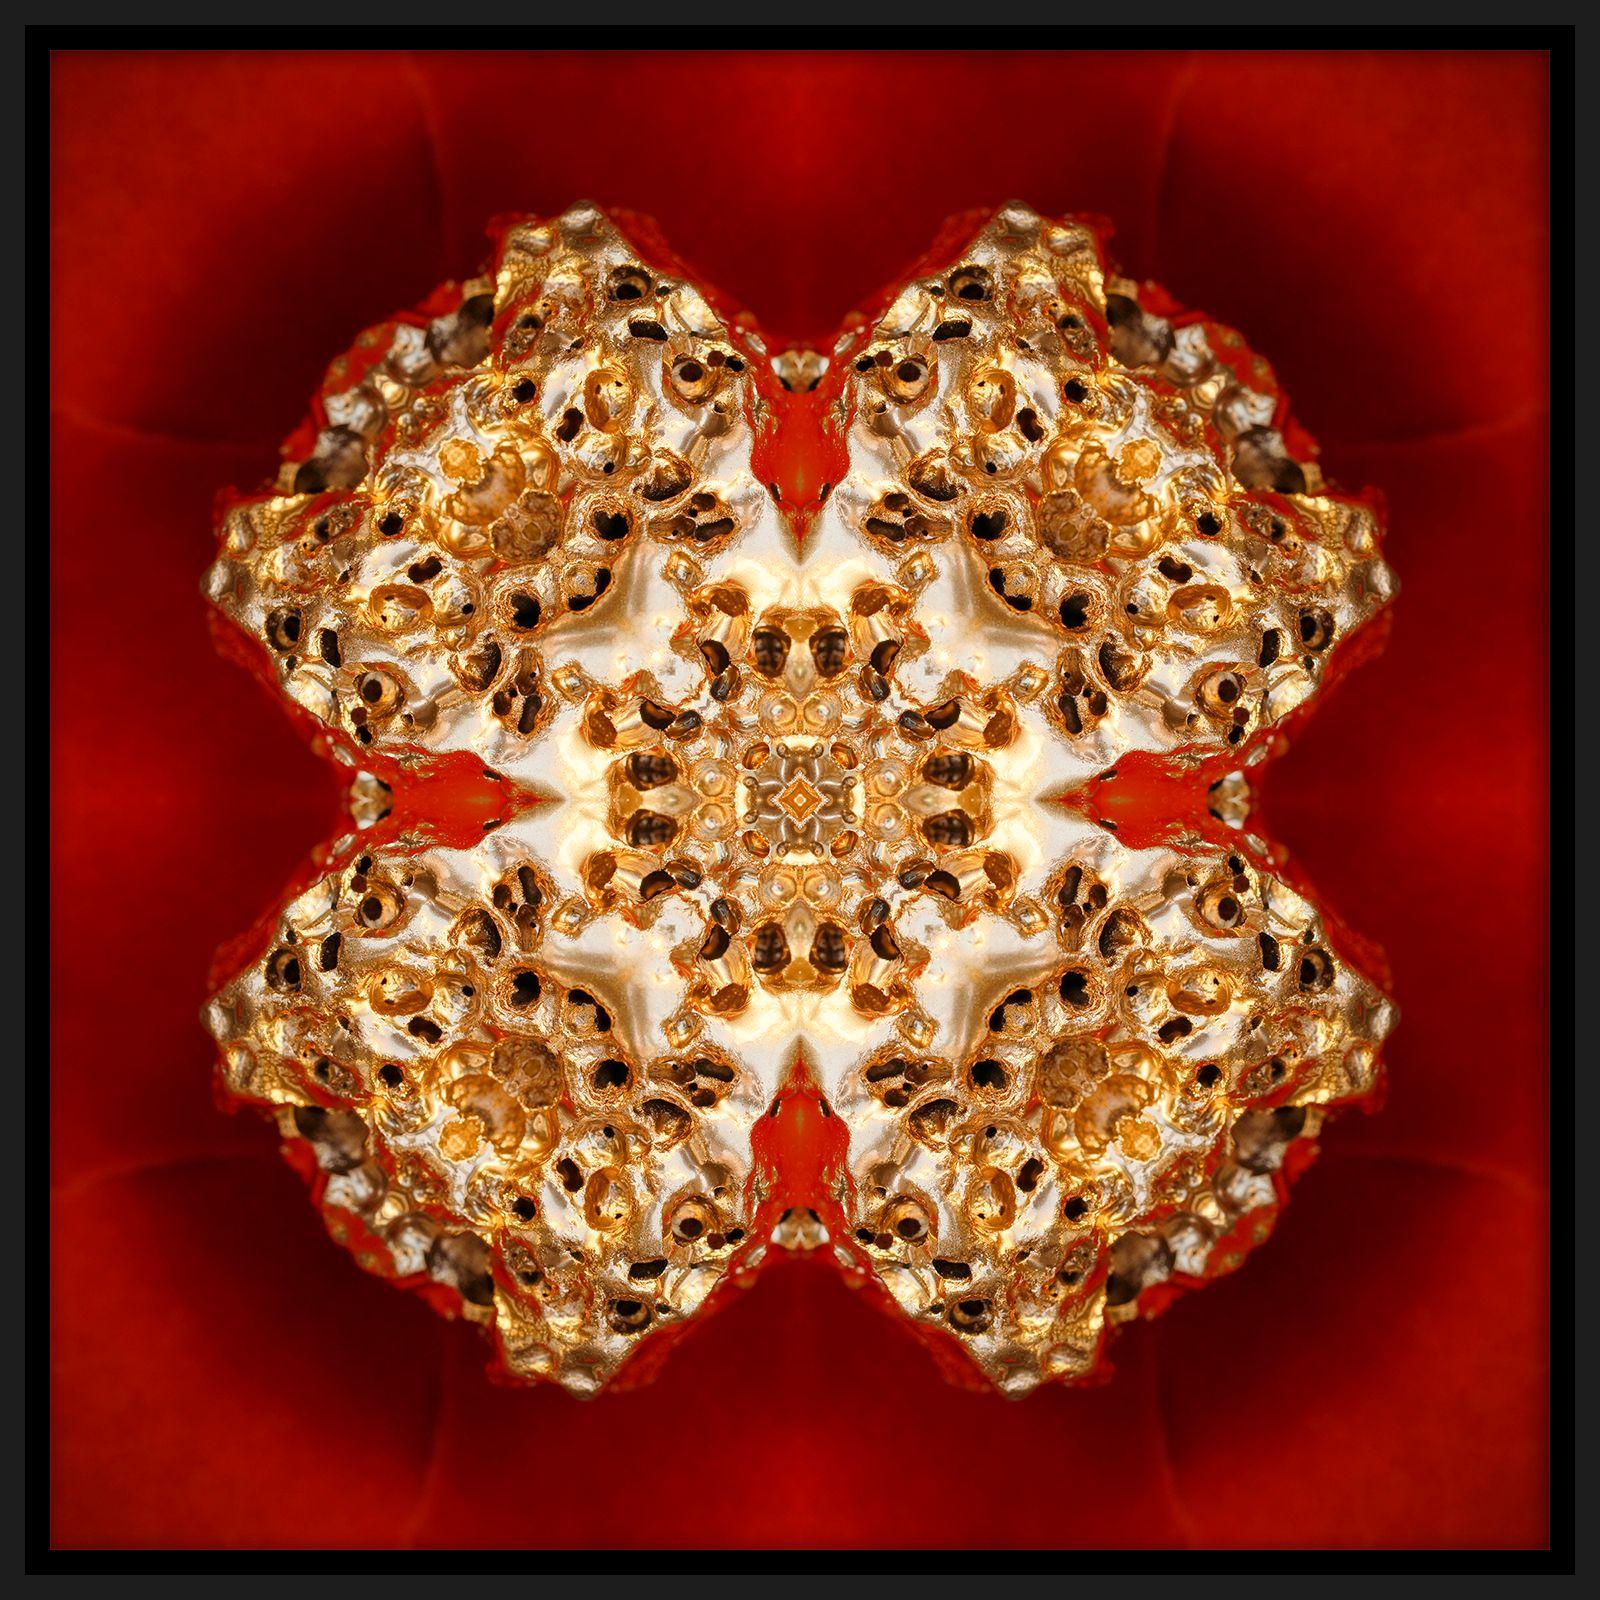 Olivier Muhlhoff Abstract Photograph - "Pépite 3", Gold Nugget on Red Semi-abstract Printed Photography on Dibond Panel